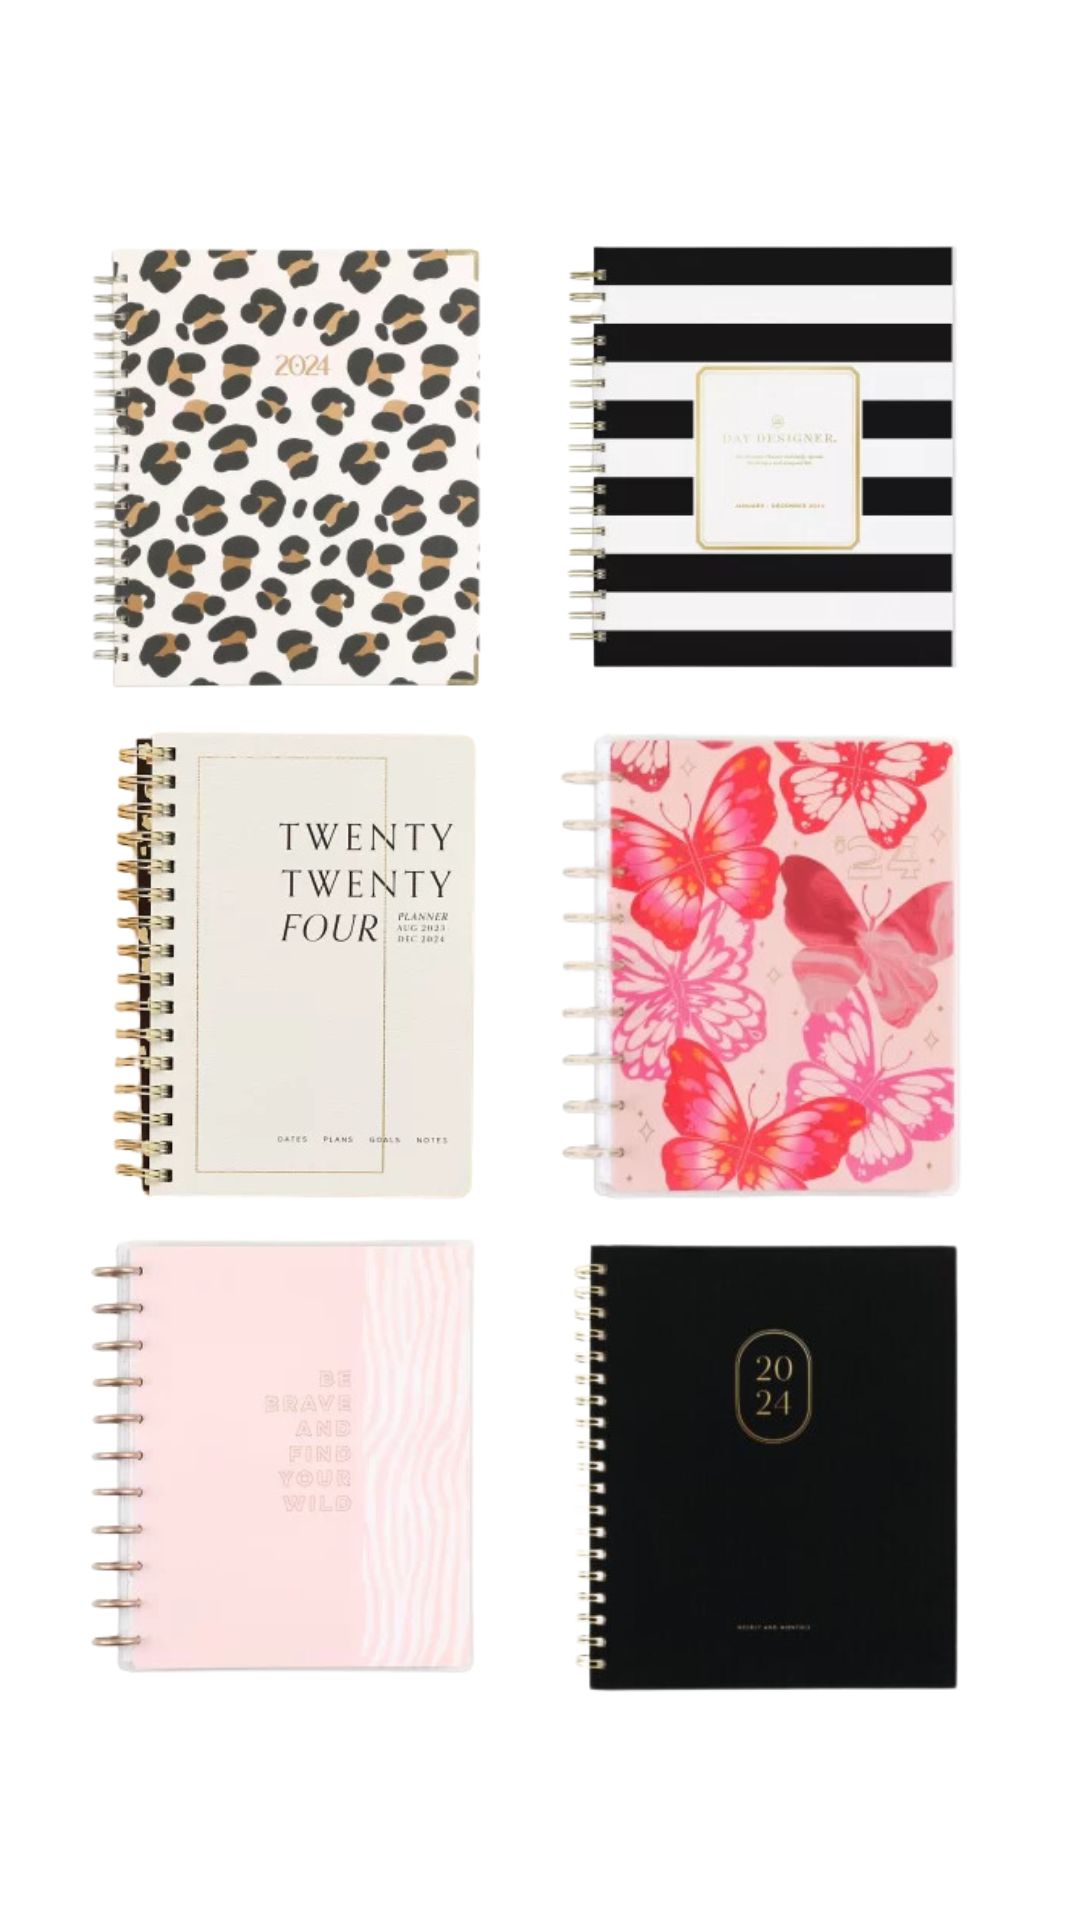 My Inspiration & Goal Board: Planner Edition + New Obsession